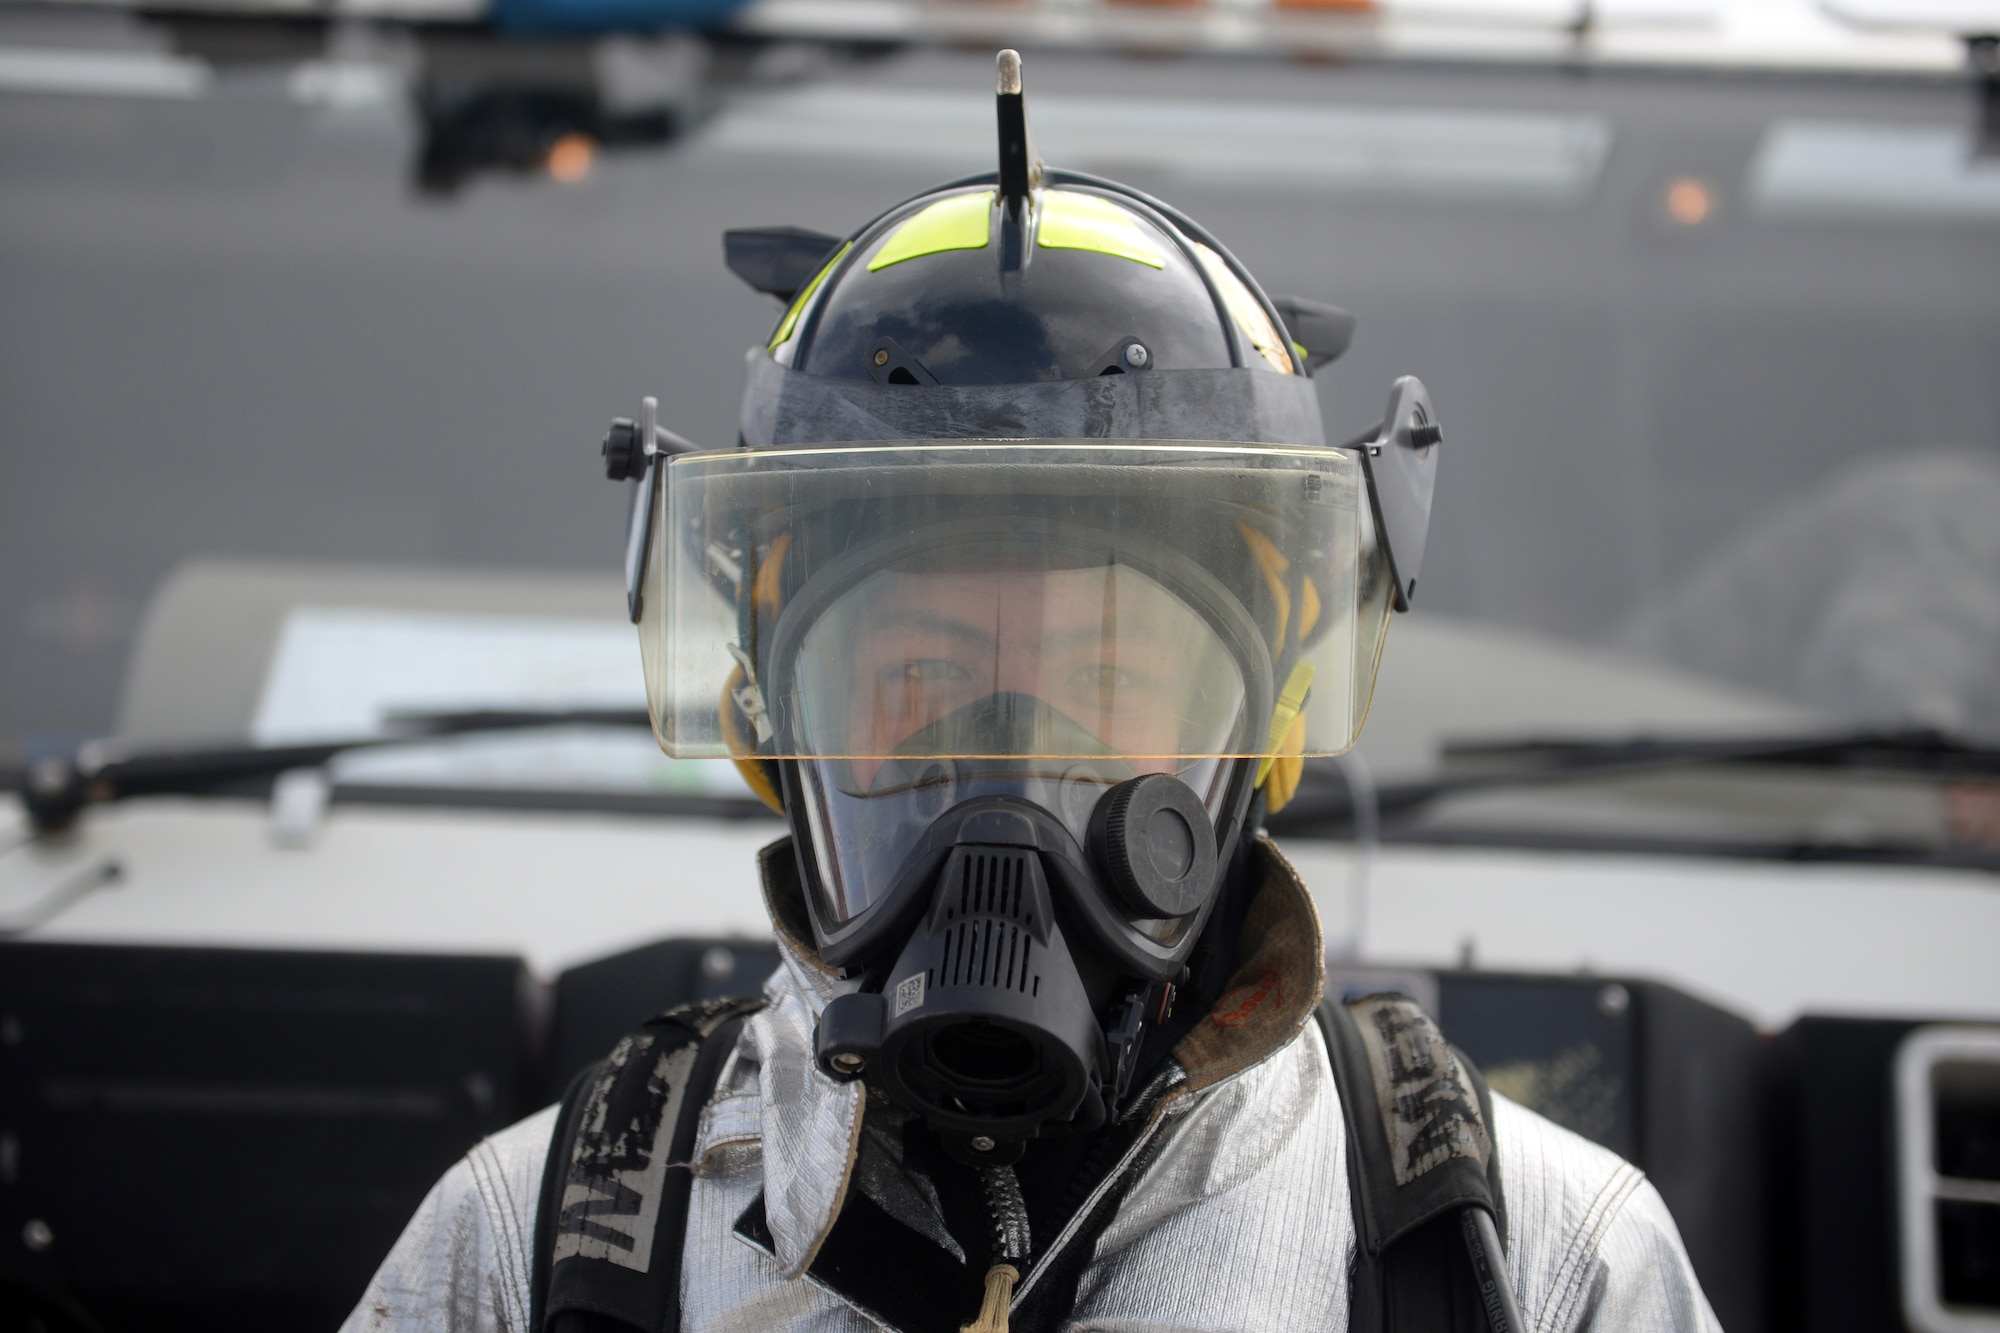 Airman 1st Class Niko Diego, 36th Civil Engineer Squadron firefighter, stands for a photo Feb. 20 during a fire truck demonstration at the 2016 Pacific Air Partners Open House at Andersen Air Force Base, Guam. Diego, alongside other members of the fire department, provided attendees the opportunity to sit in a fire truck and learn about their mission. (U.S. Air Force photo/Senior Airman Joshua Smoot)